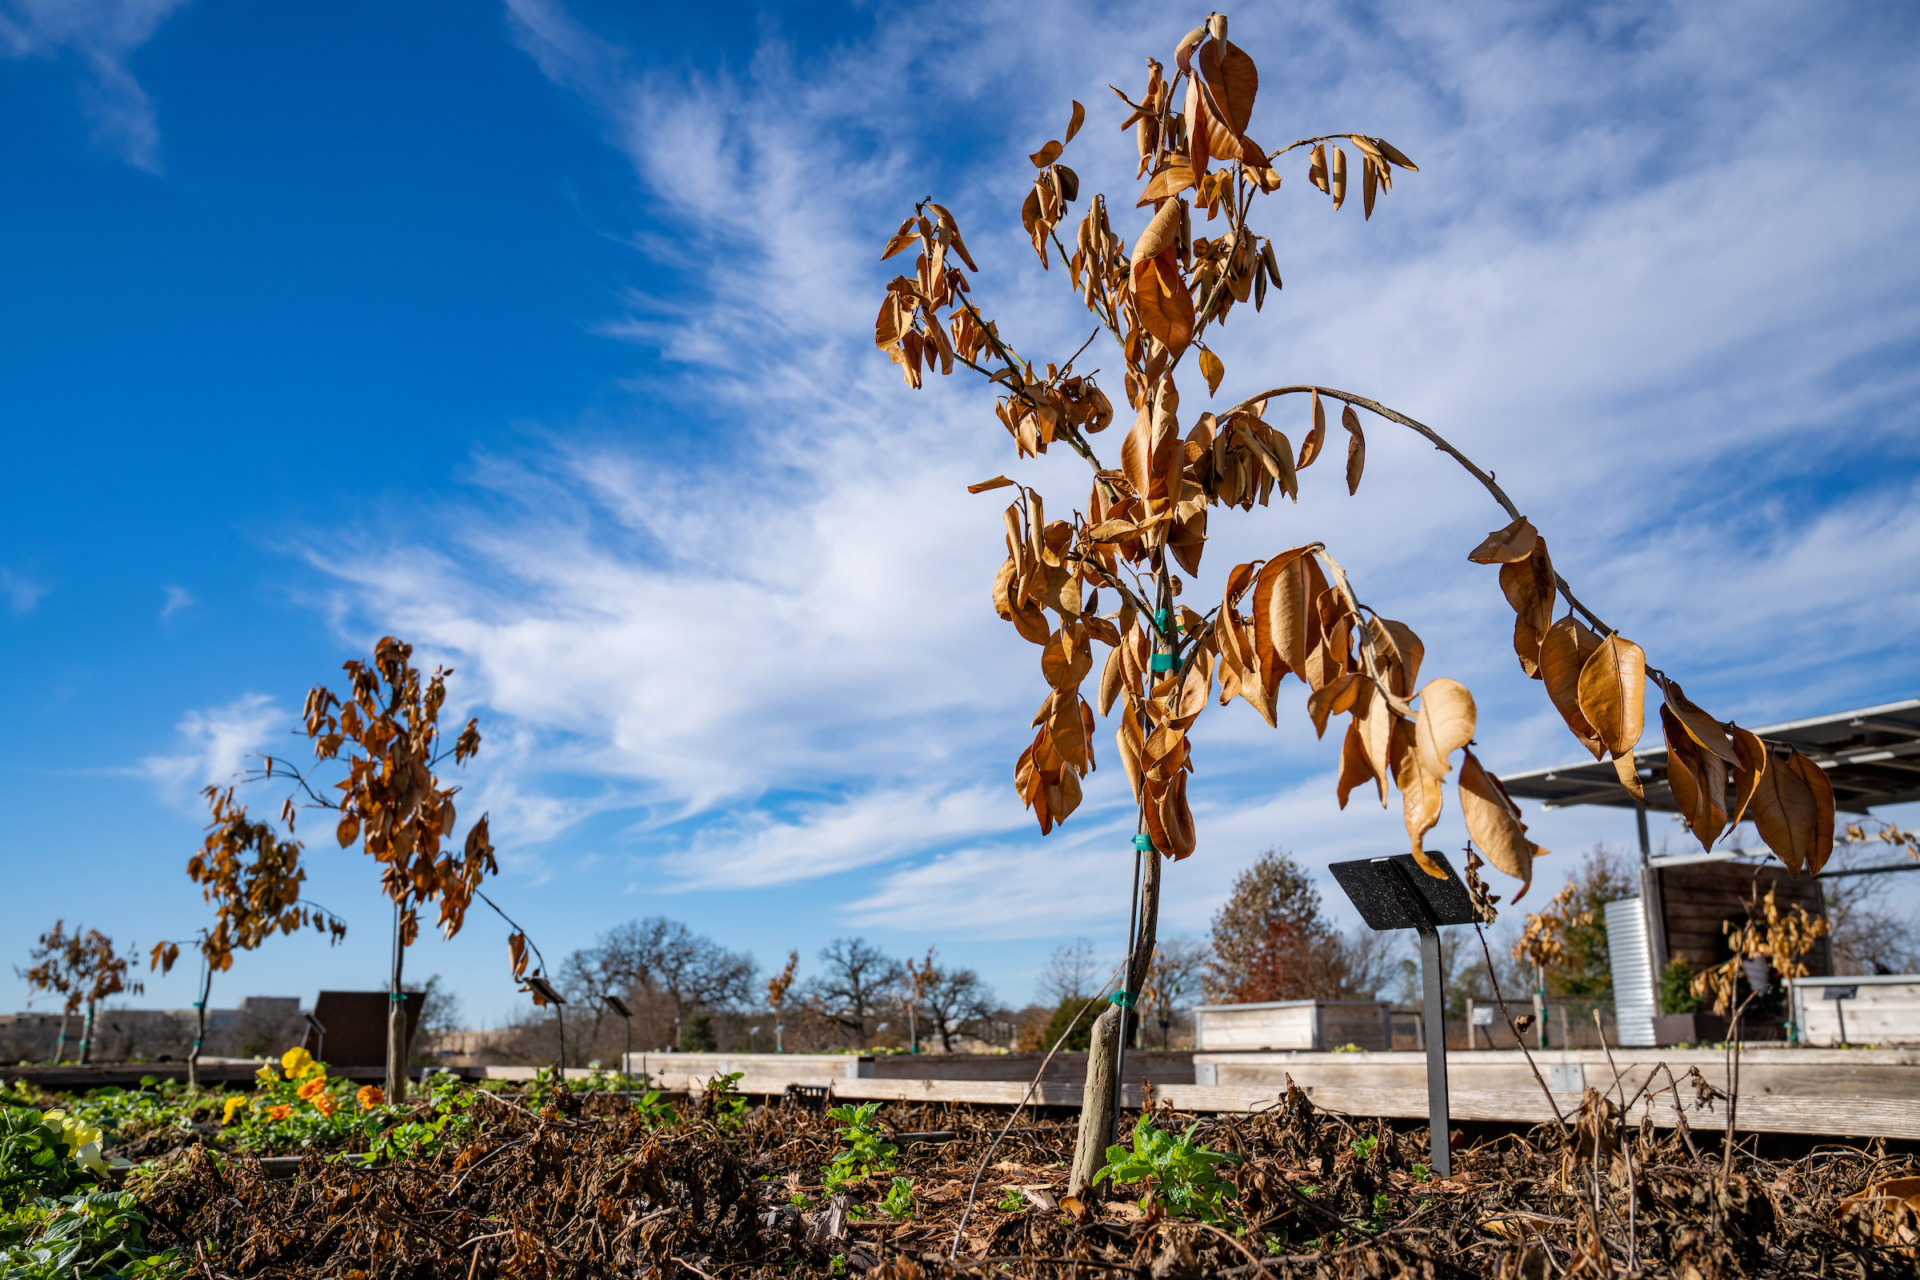 Freeze damaged trees may not make it after this latest cold snap, but homeowners should give high-value plants a chance to recover before removing them. ‘Looking dead’ is not necessarily dead in many cases. (Texas A&M AgriLife photo by Courtney Sacco)